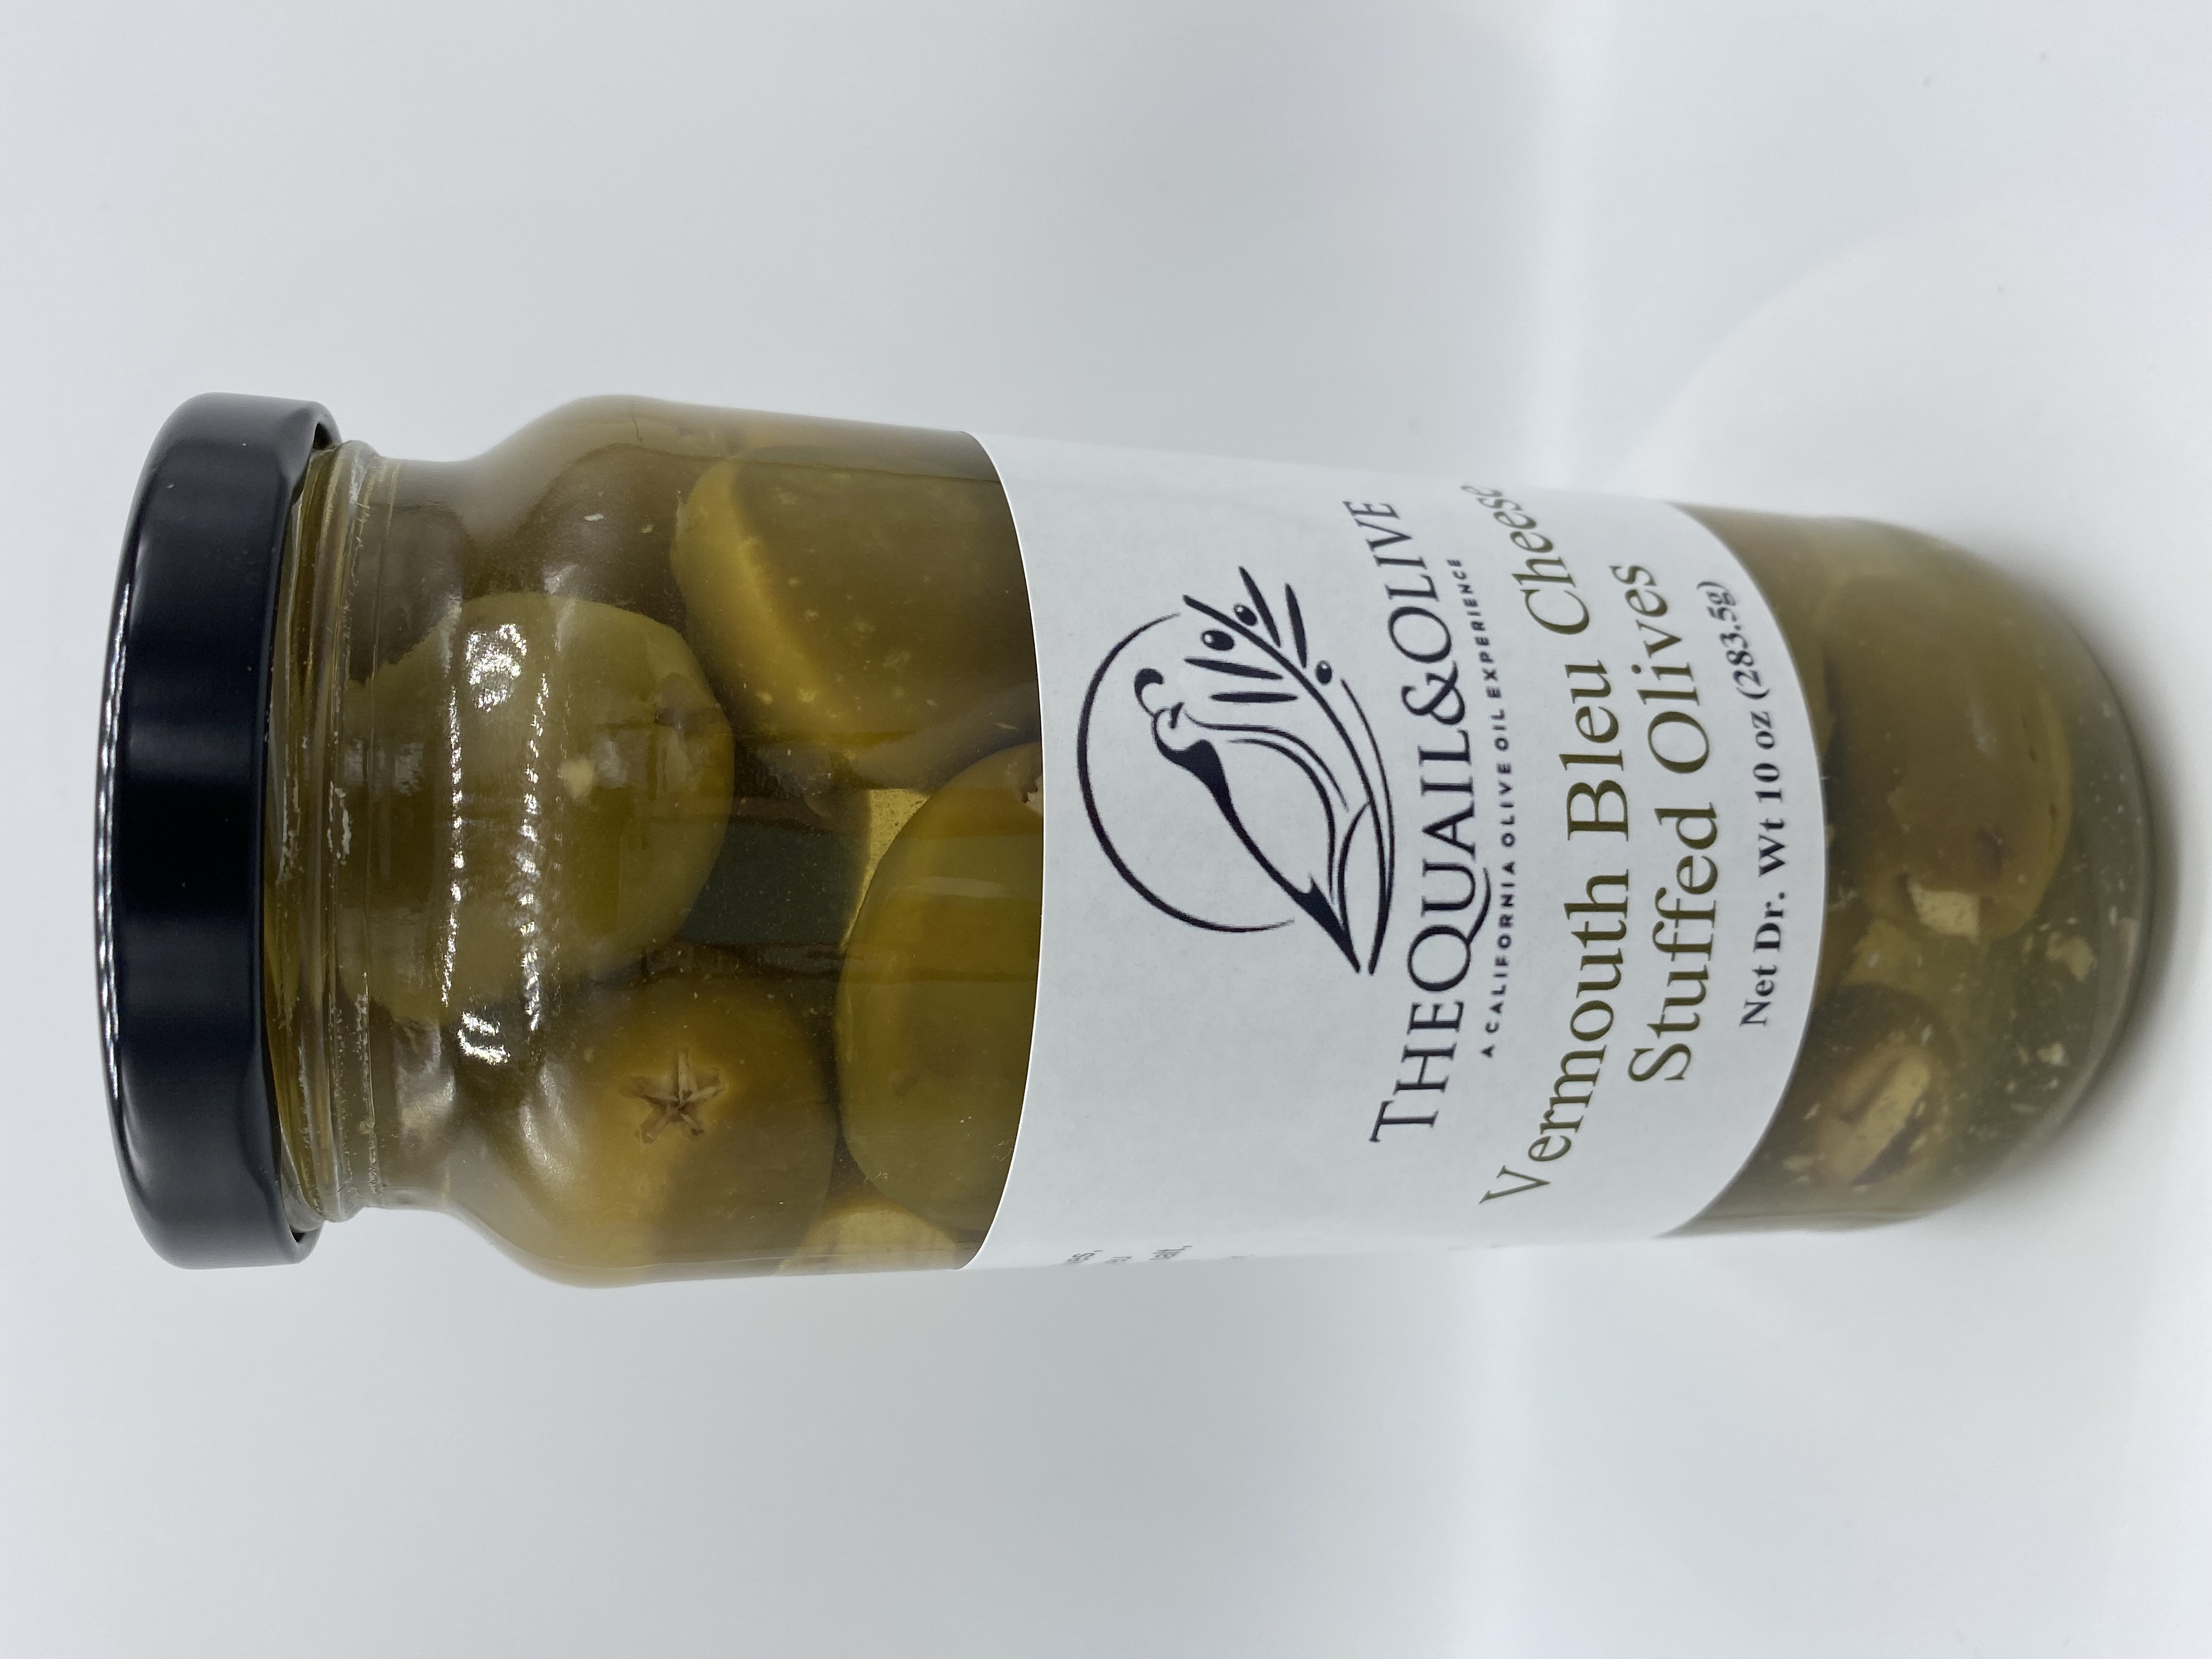 Product Image for Q&O Vermouth Bleu Cheese Stuffed Olives